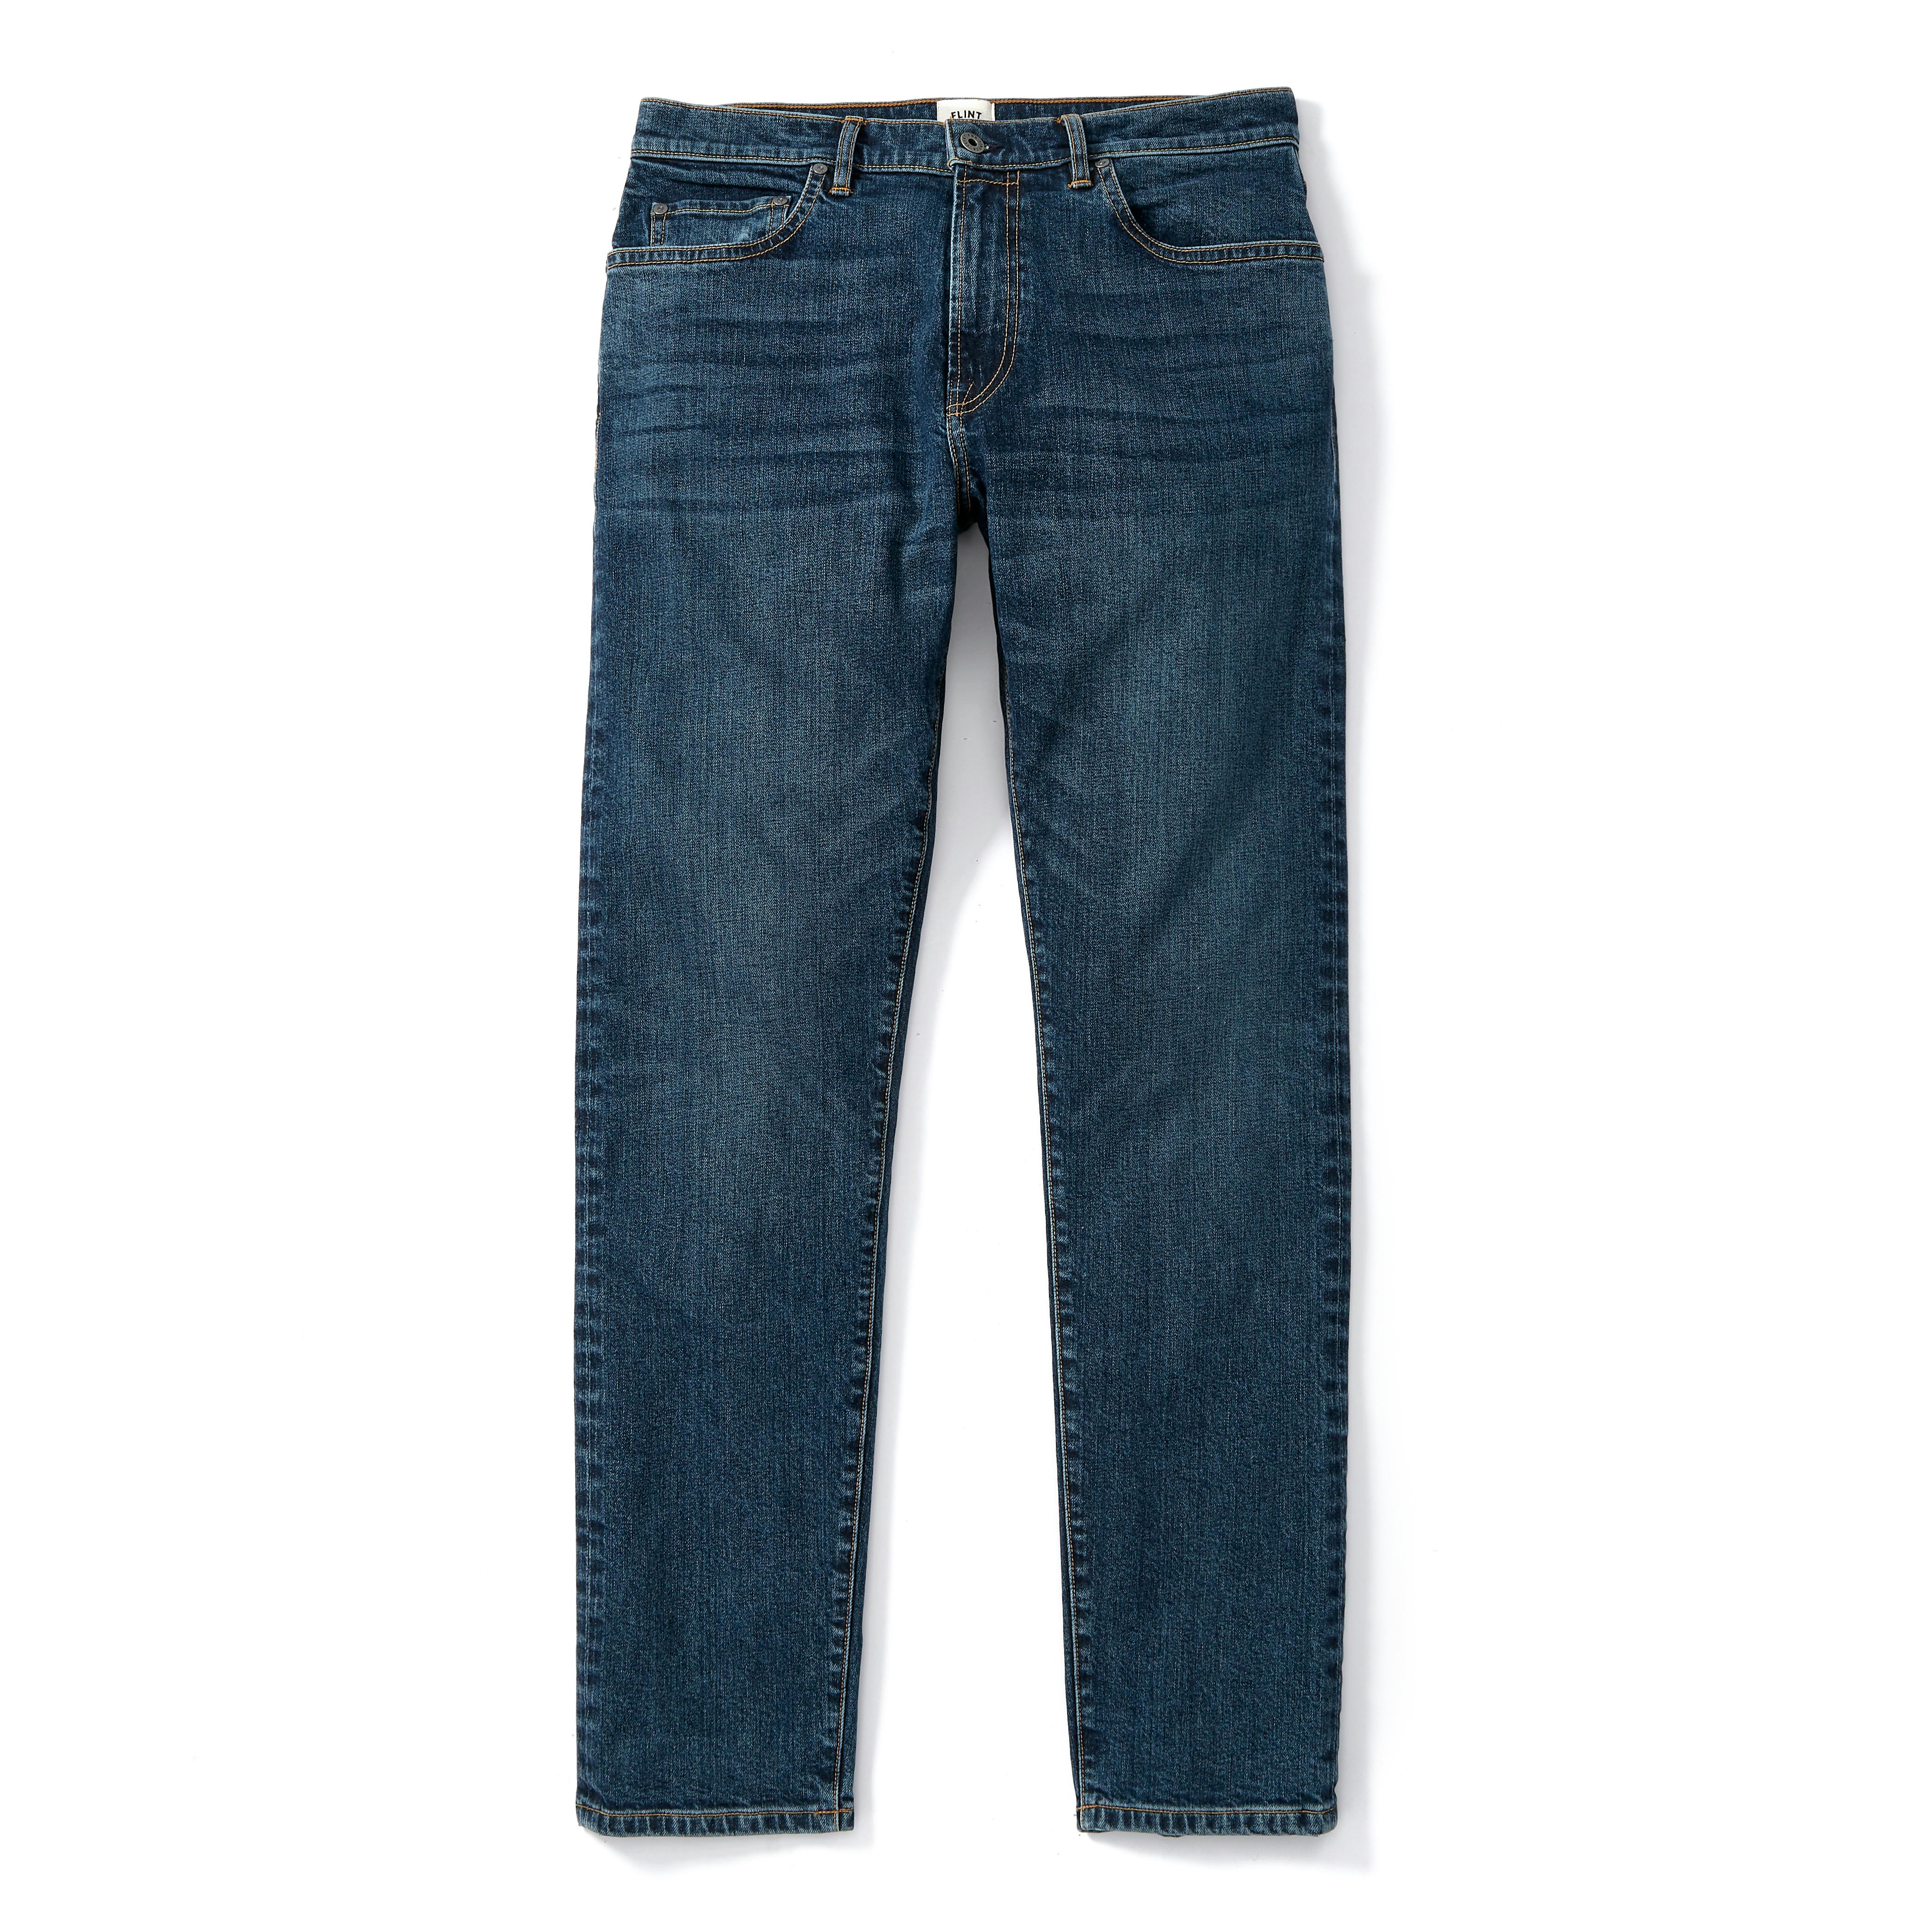 Flint and Tinder 1-Year Wash Jeans - Slim